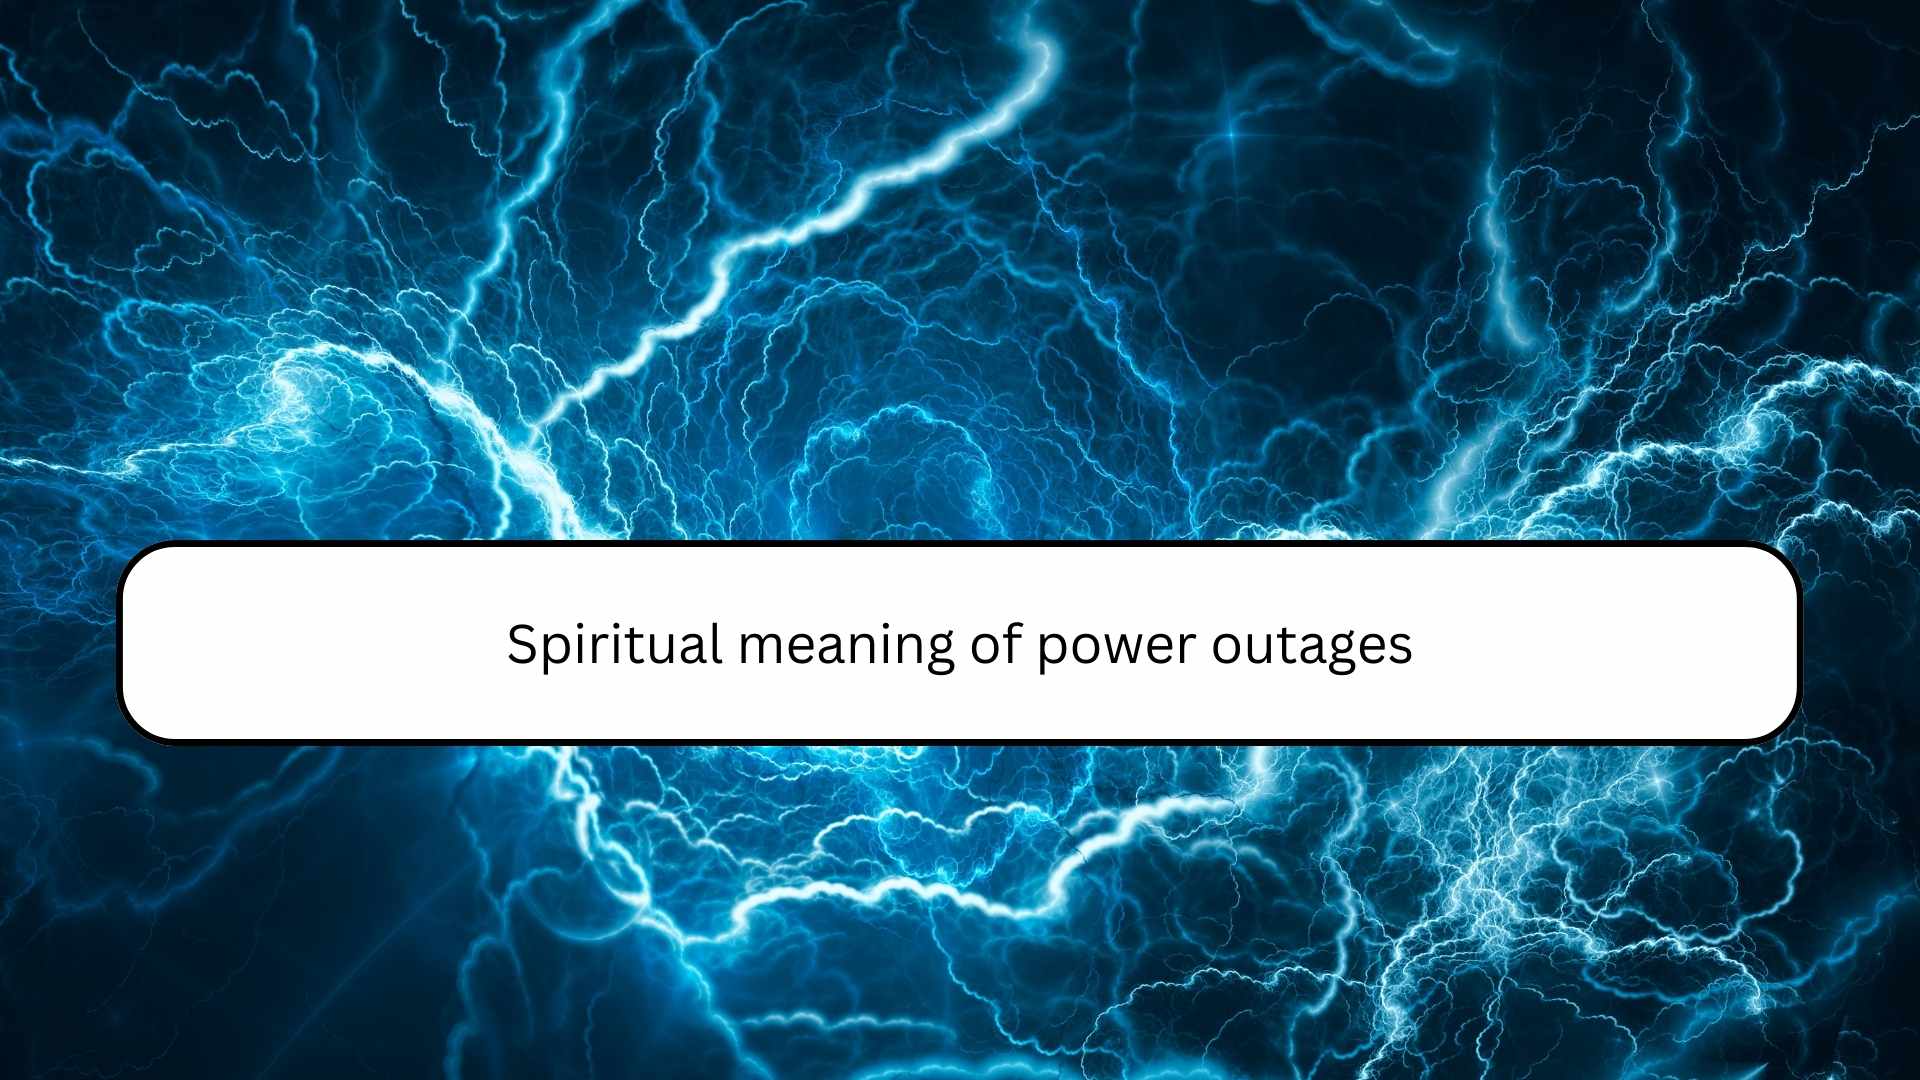 Spiritual meaning of power outages